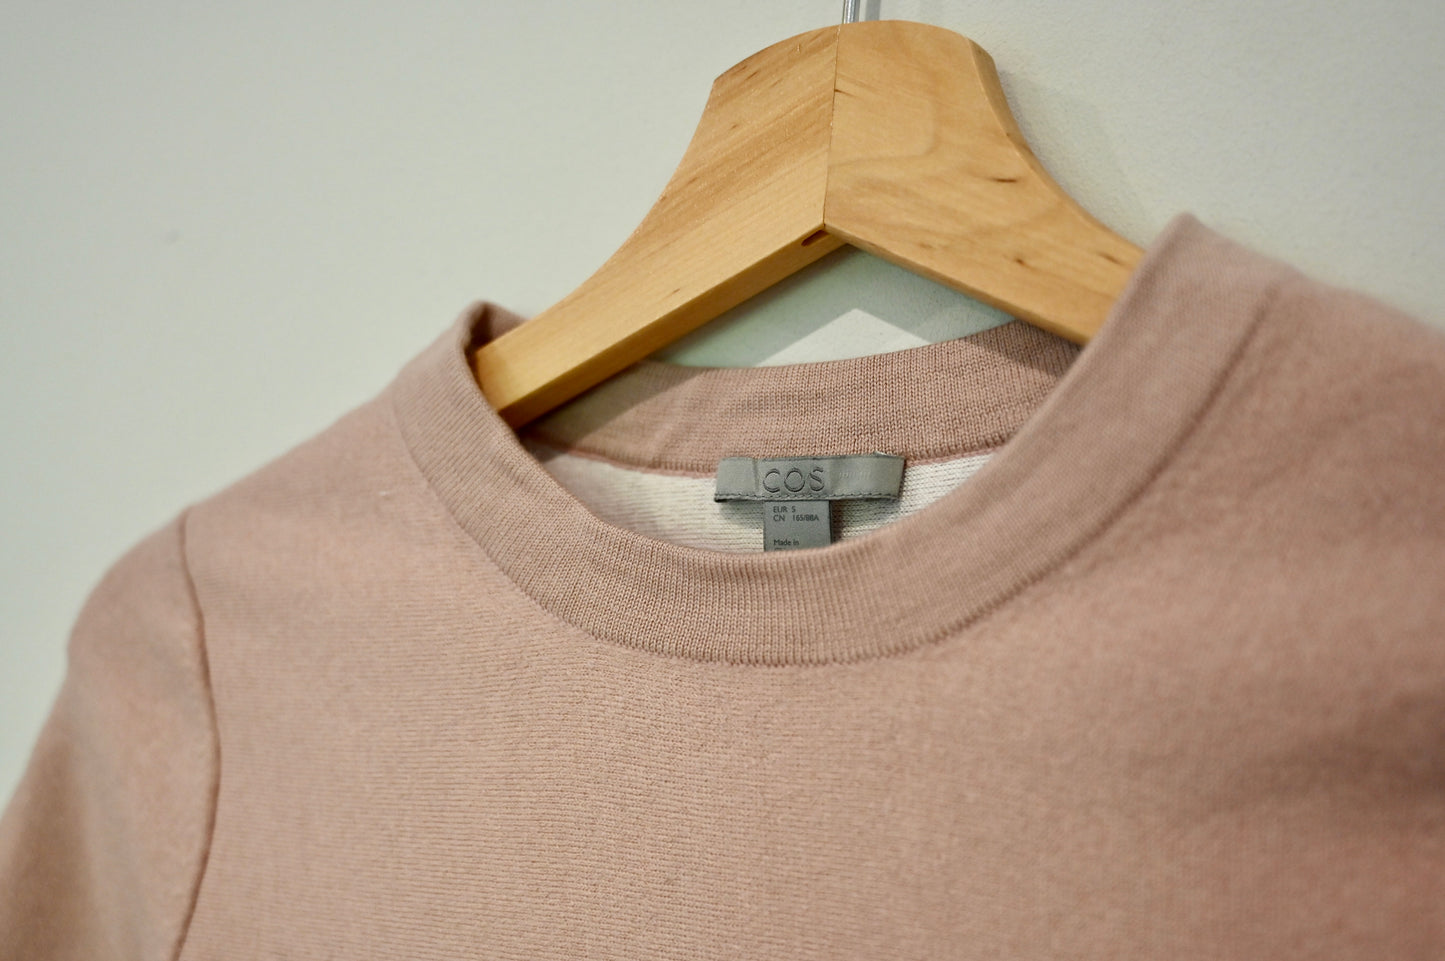 COS pale pink sweater